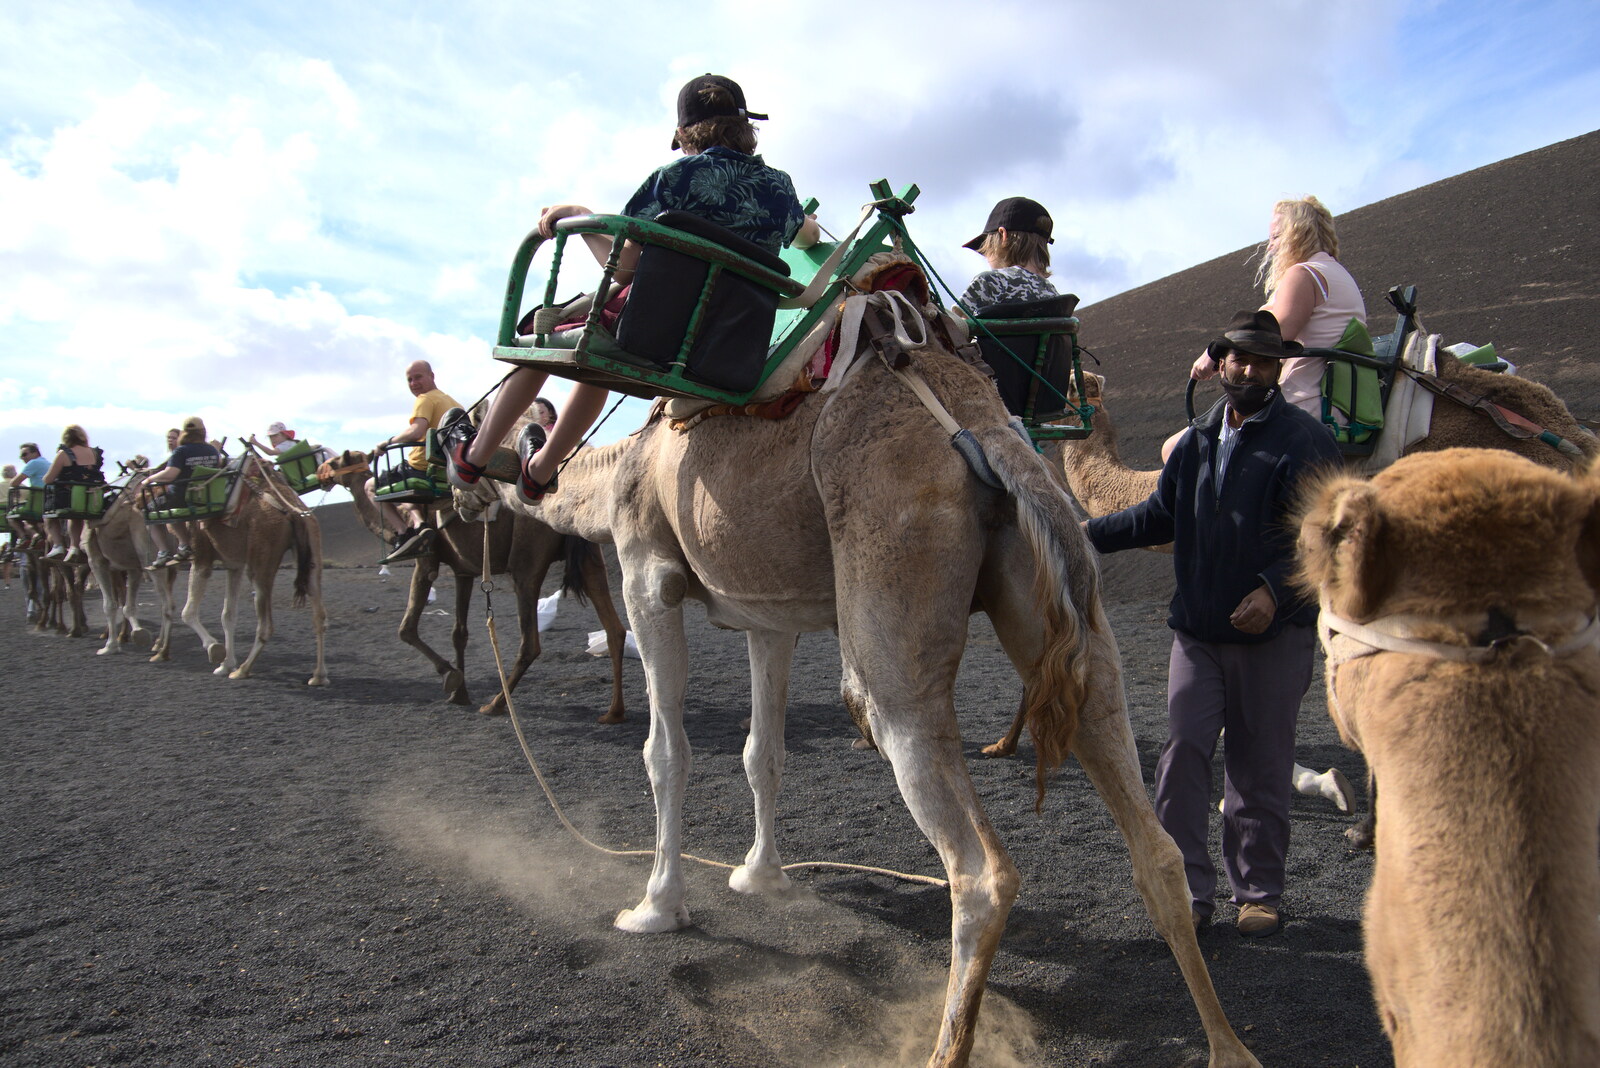 Fred and Harry's camel launches itself up from The Volcanoes of Lanzarote, Canary Islands, Spain - 27th October 2021